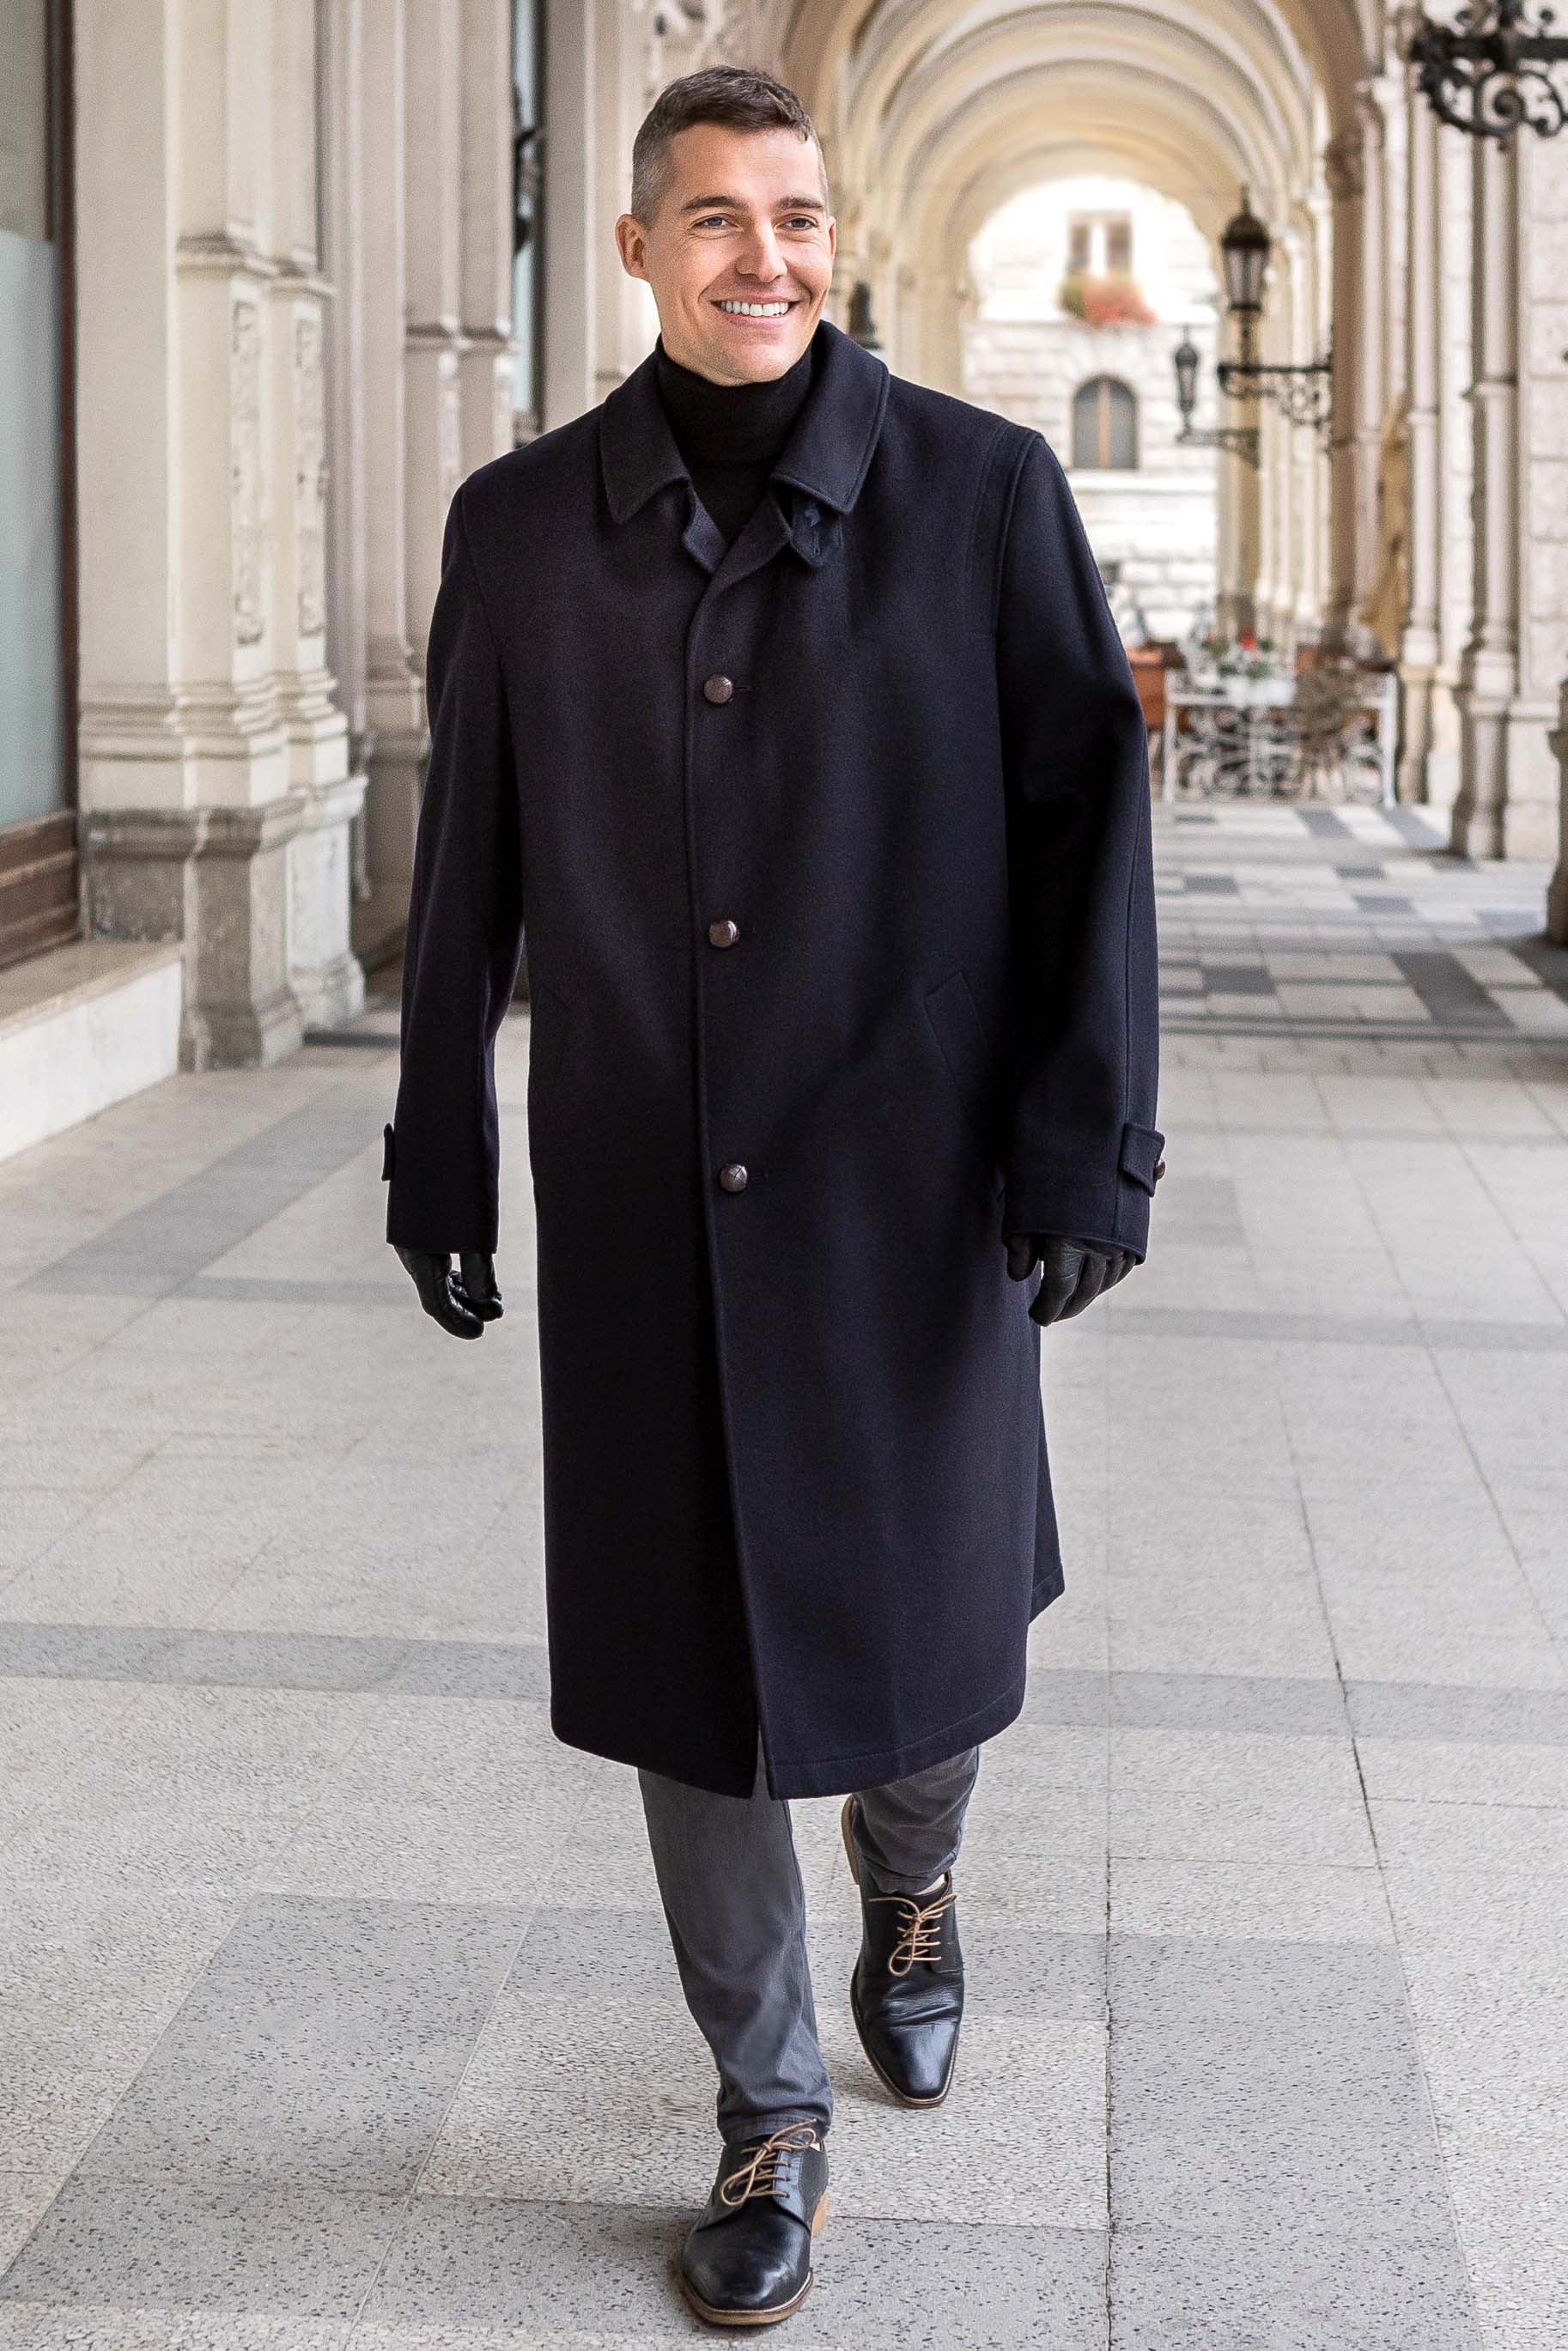 Sud Tiroler - Men's Loden Overcoat in Navy Blue with zip out lining